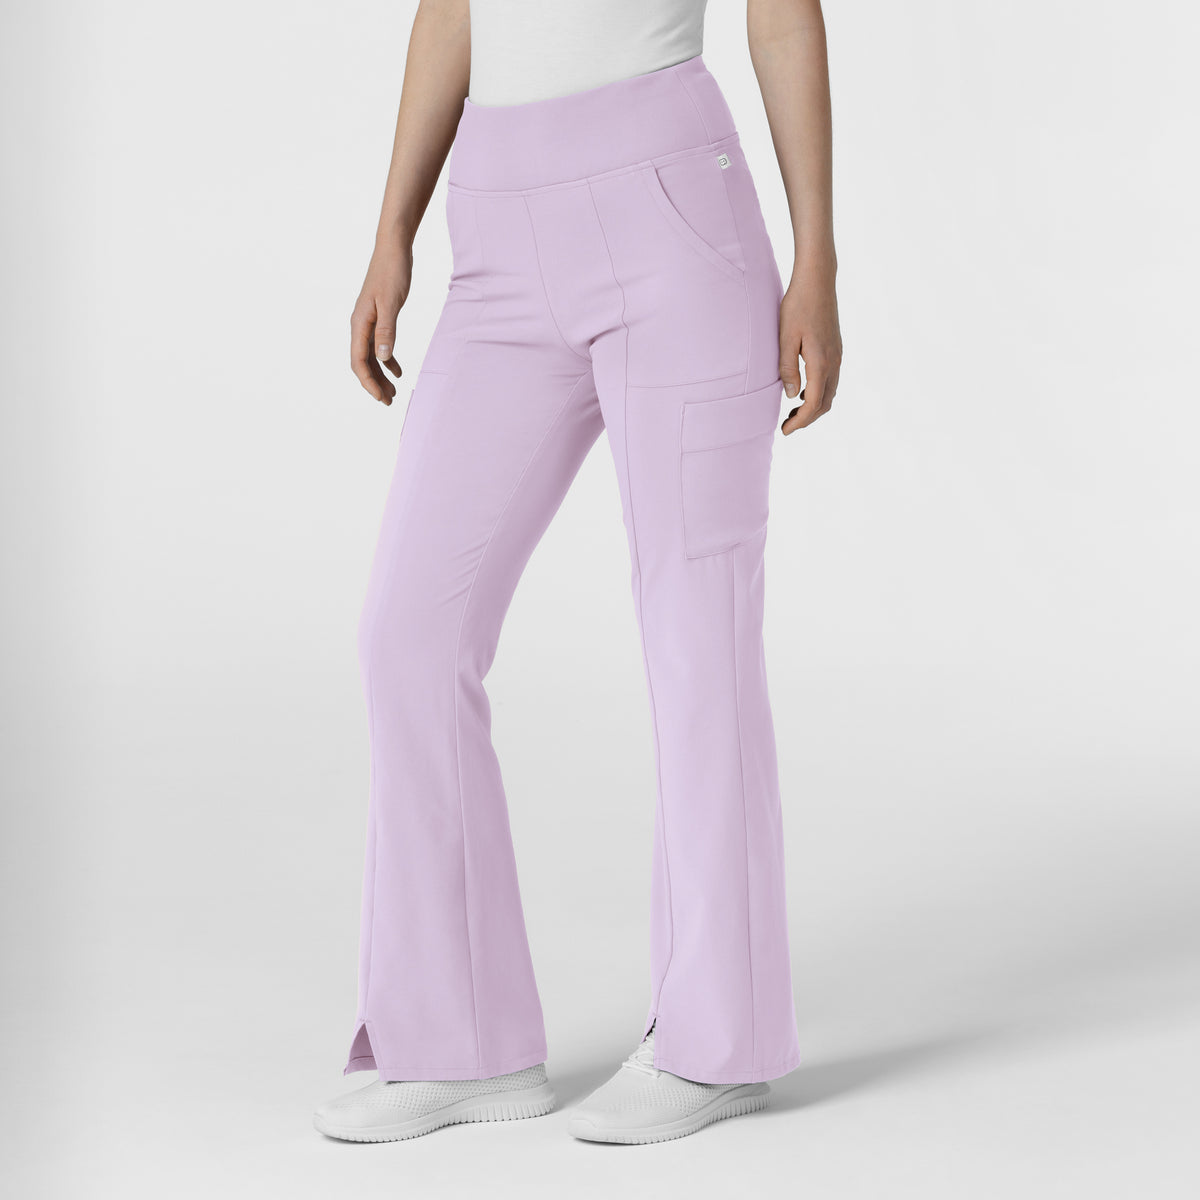 RENEW Women's Front Slit Flare Scrub Pant Pastel Lilac side view